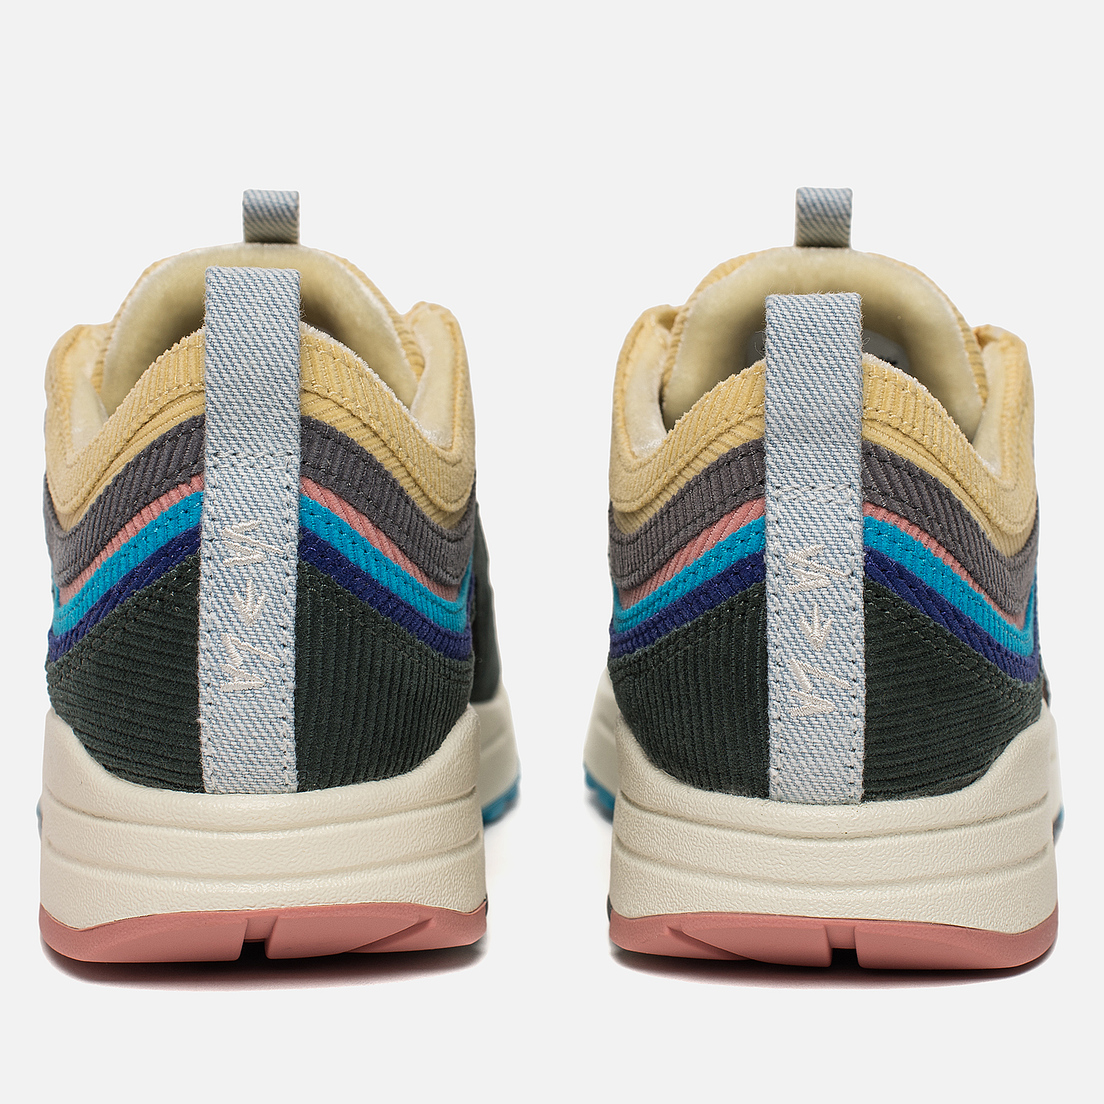 Nike Кроссовки x Sean Wotherspoon Air Max 1/97 VF